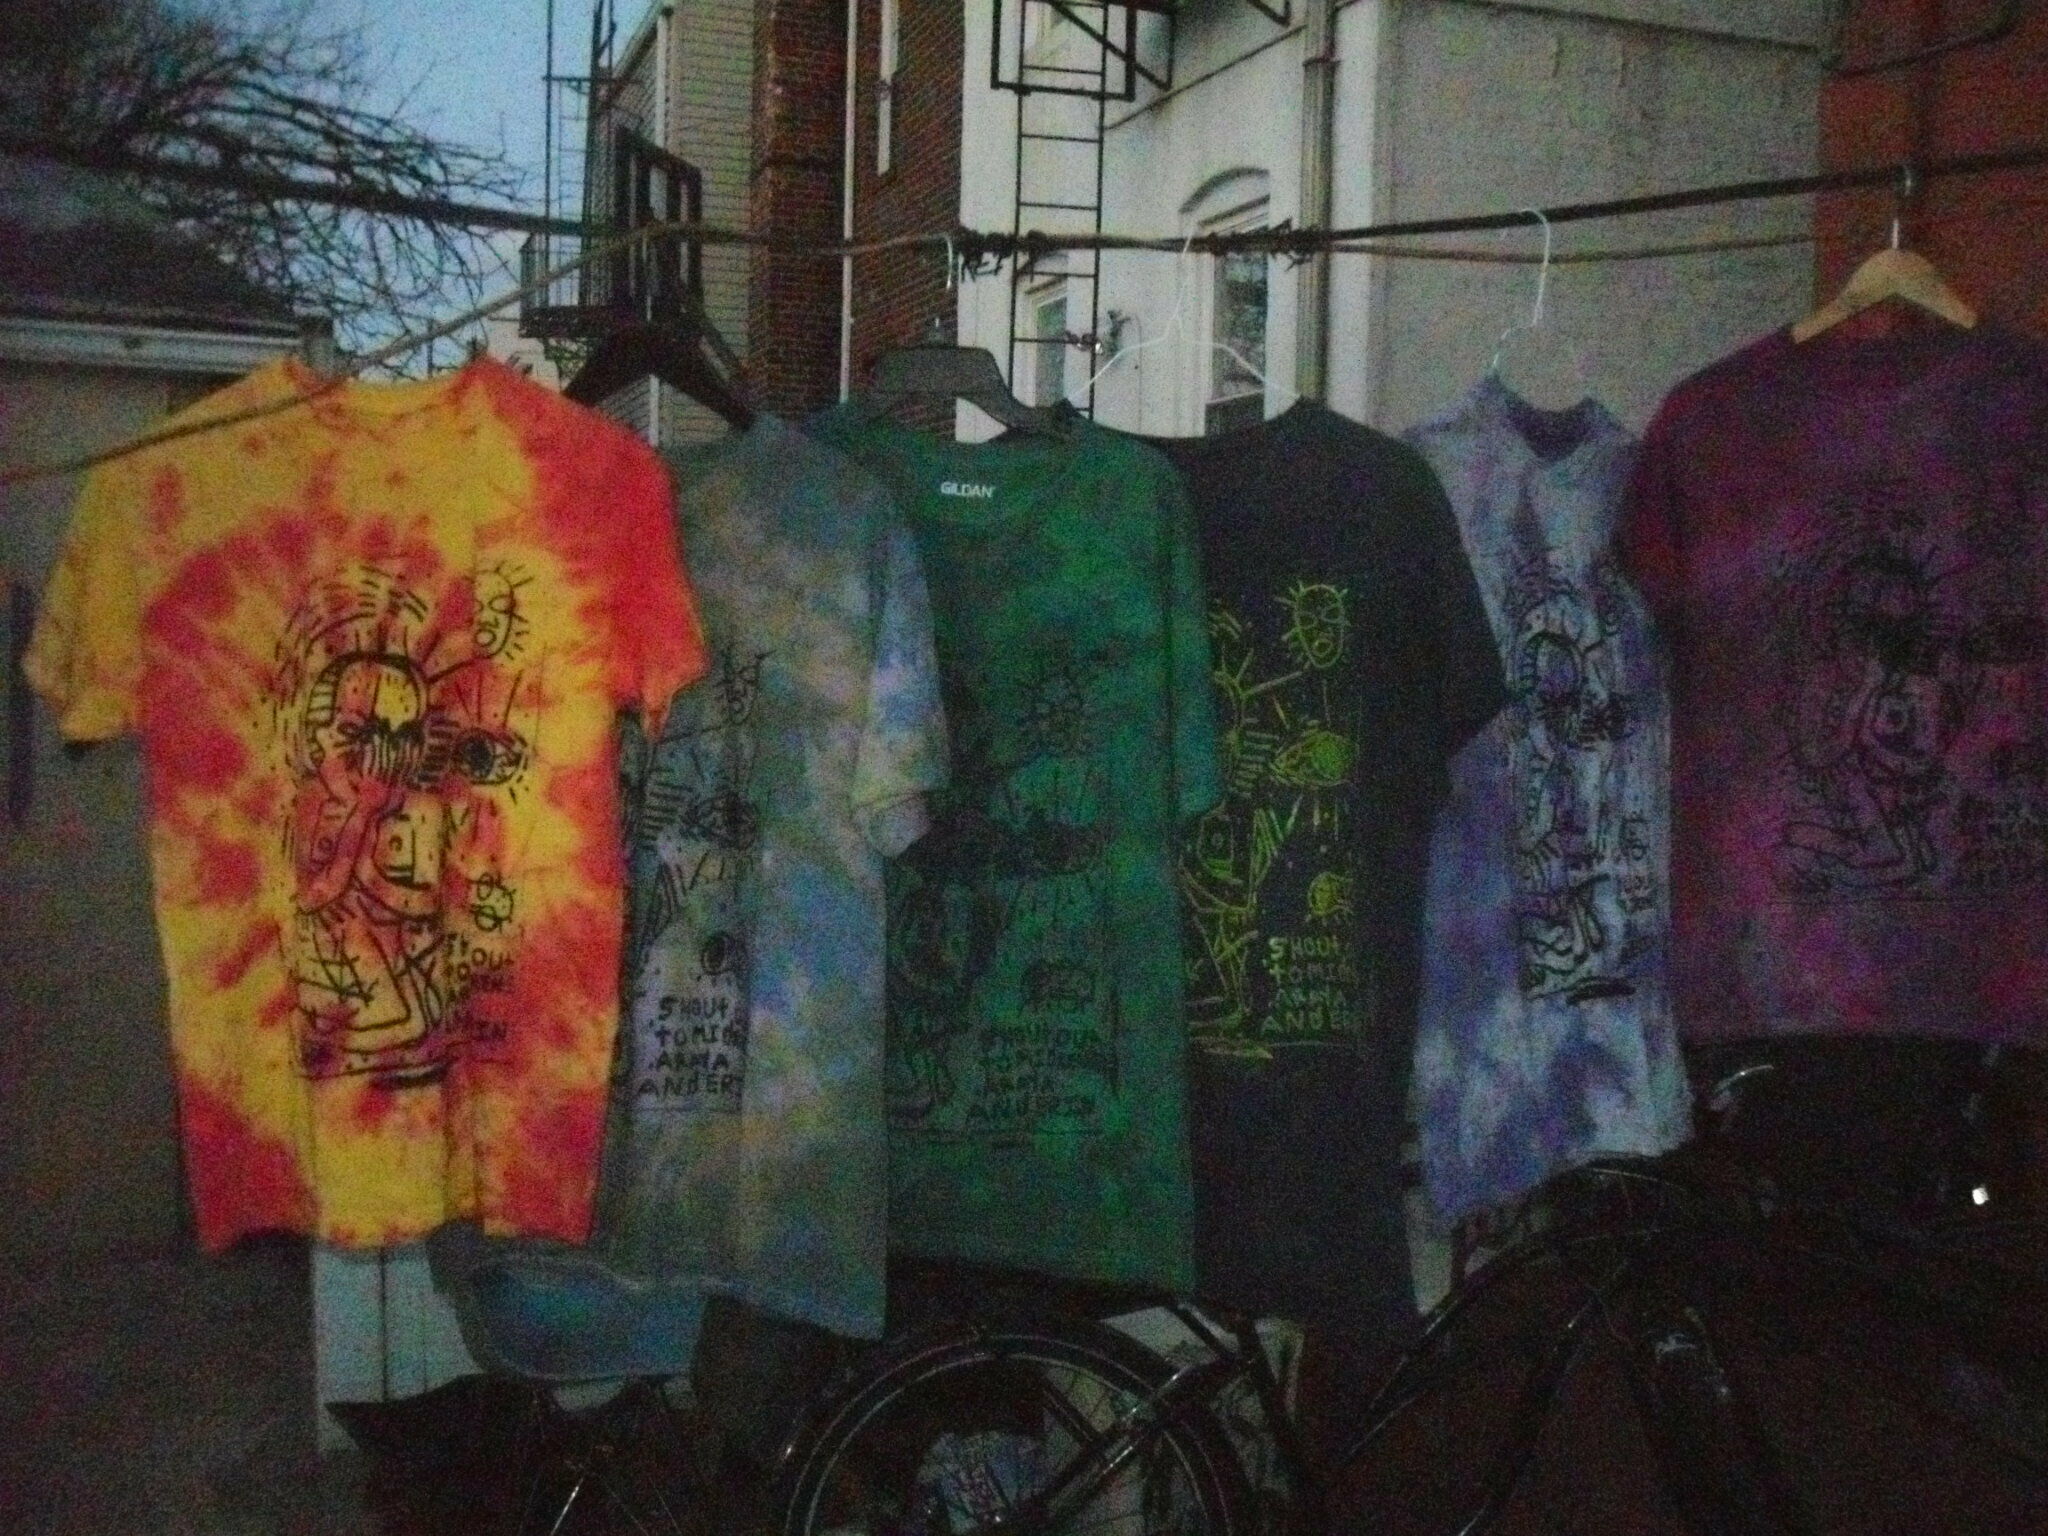 A series of tie-dye shirts hanging on a clothesline. 